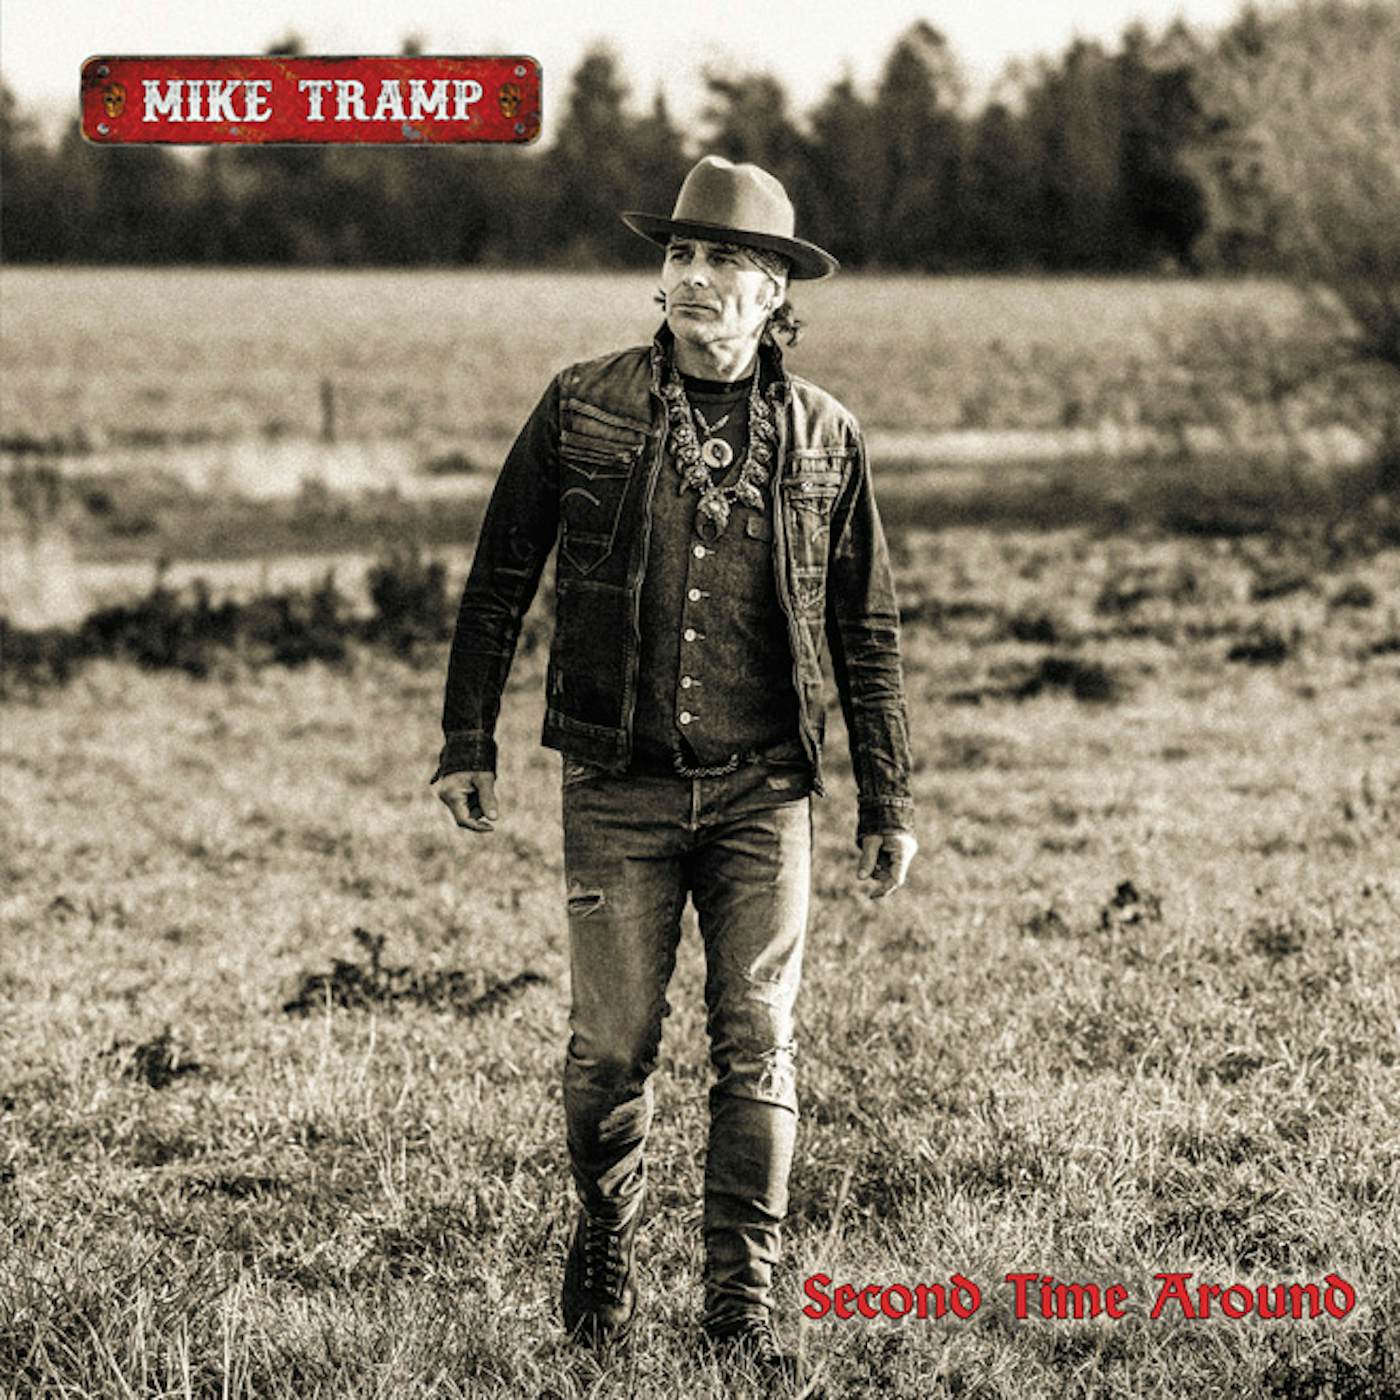 Mike Tramp SECOND TIME AROUND CD